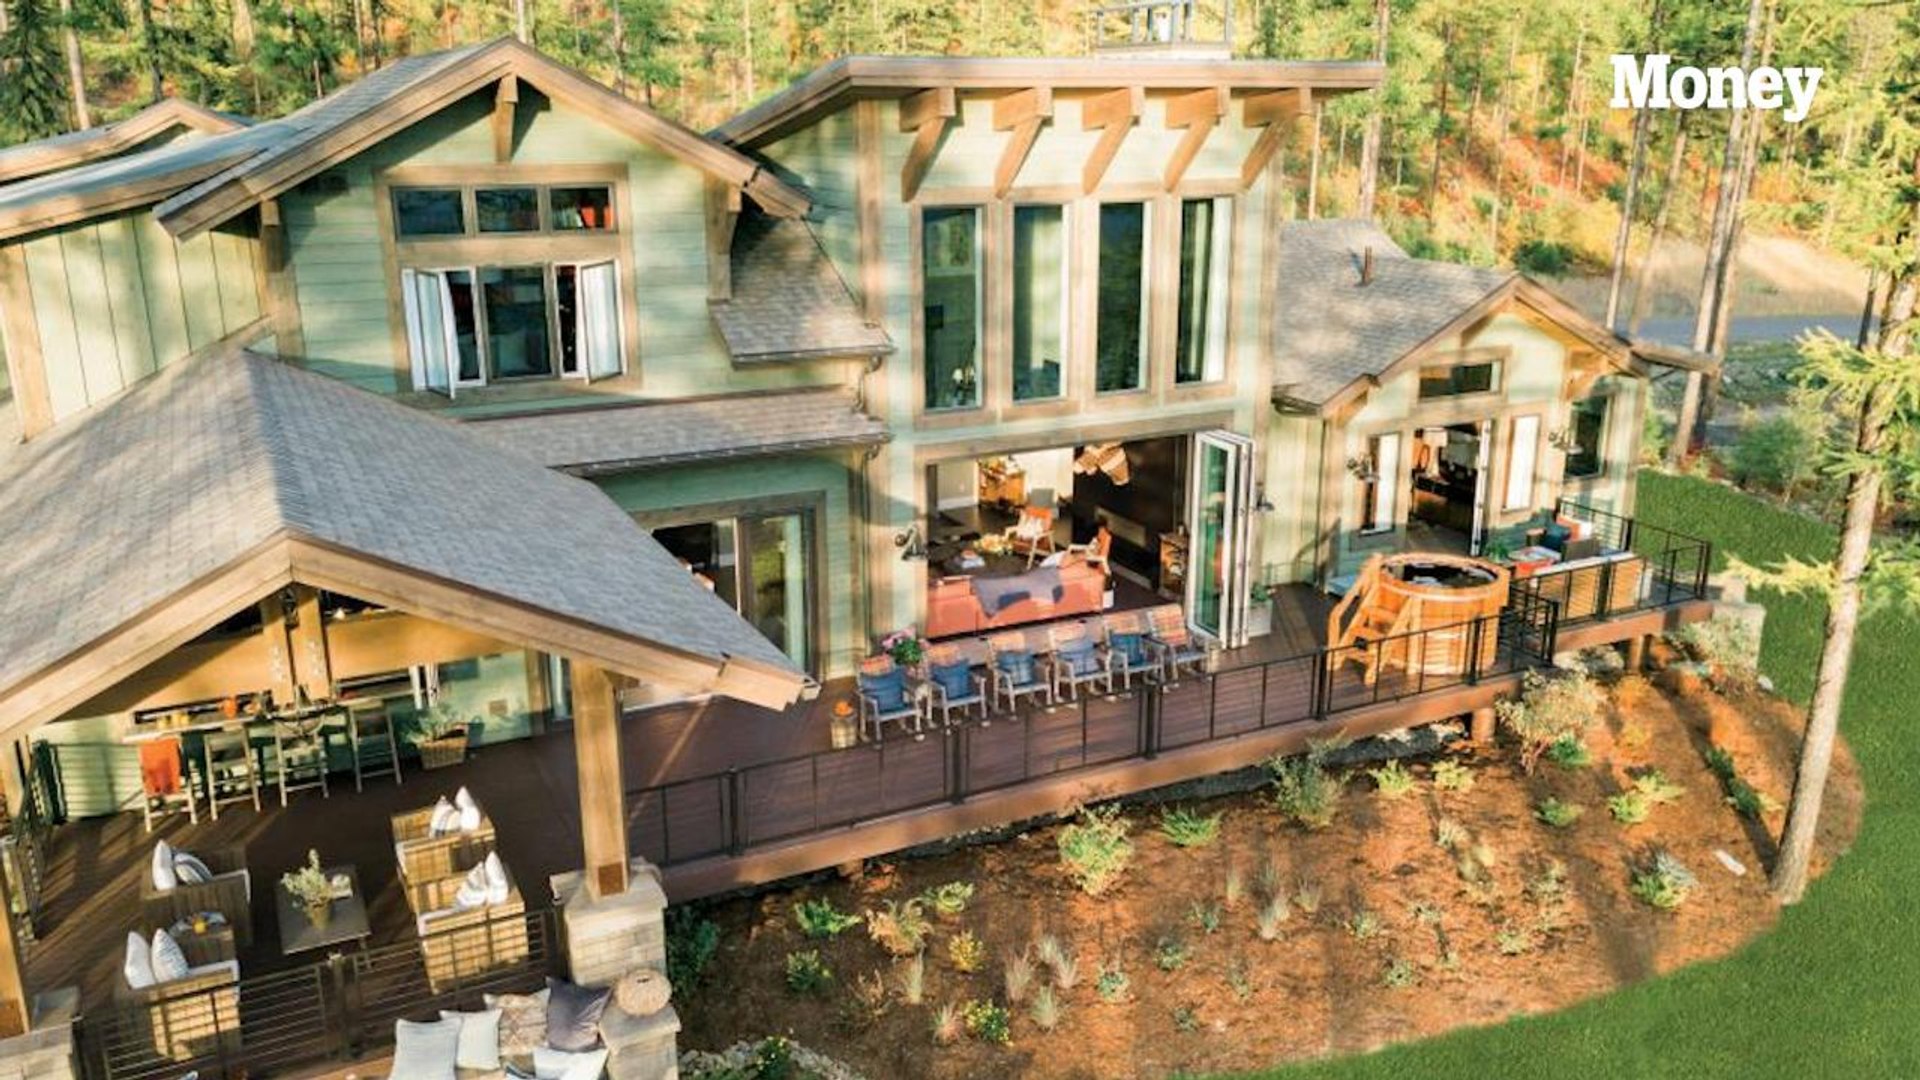 HGTV just gave away this $2.3 million dream house - take a look inside